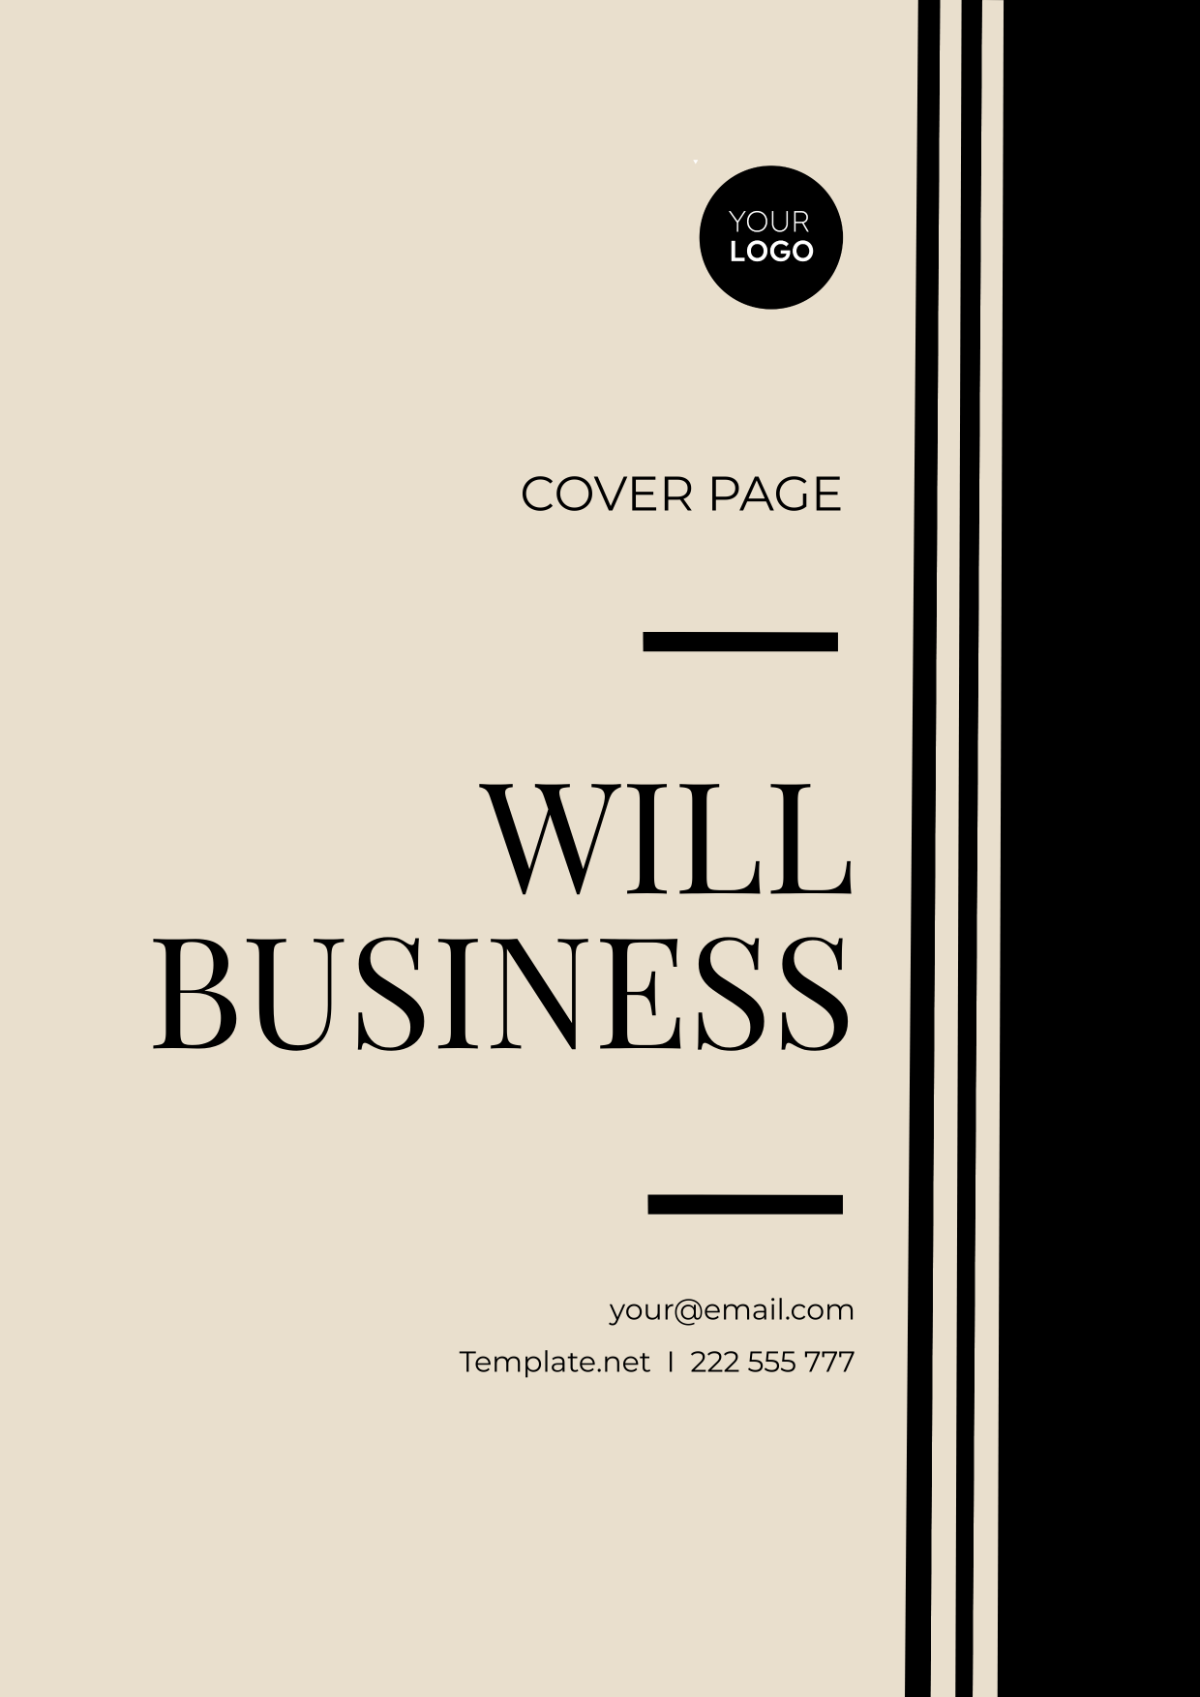 Will Business Cover Page Template